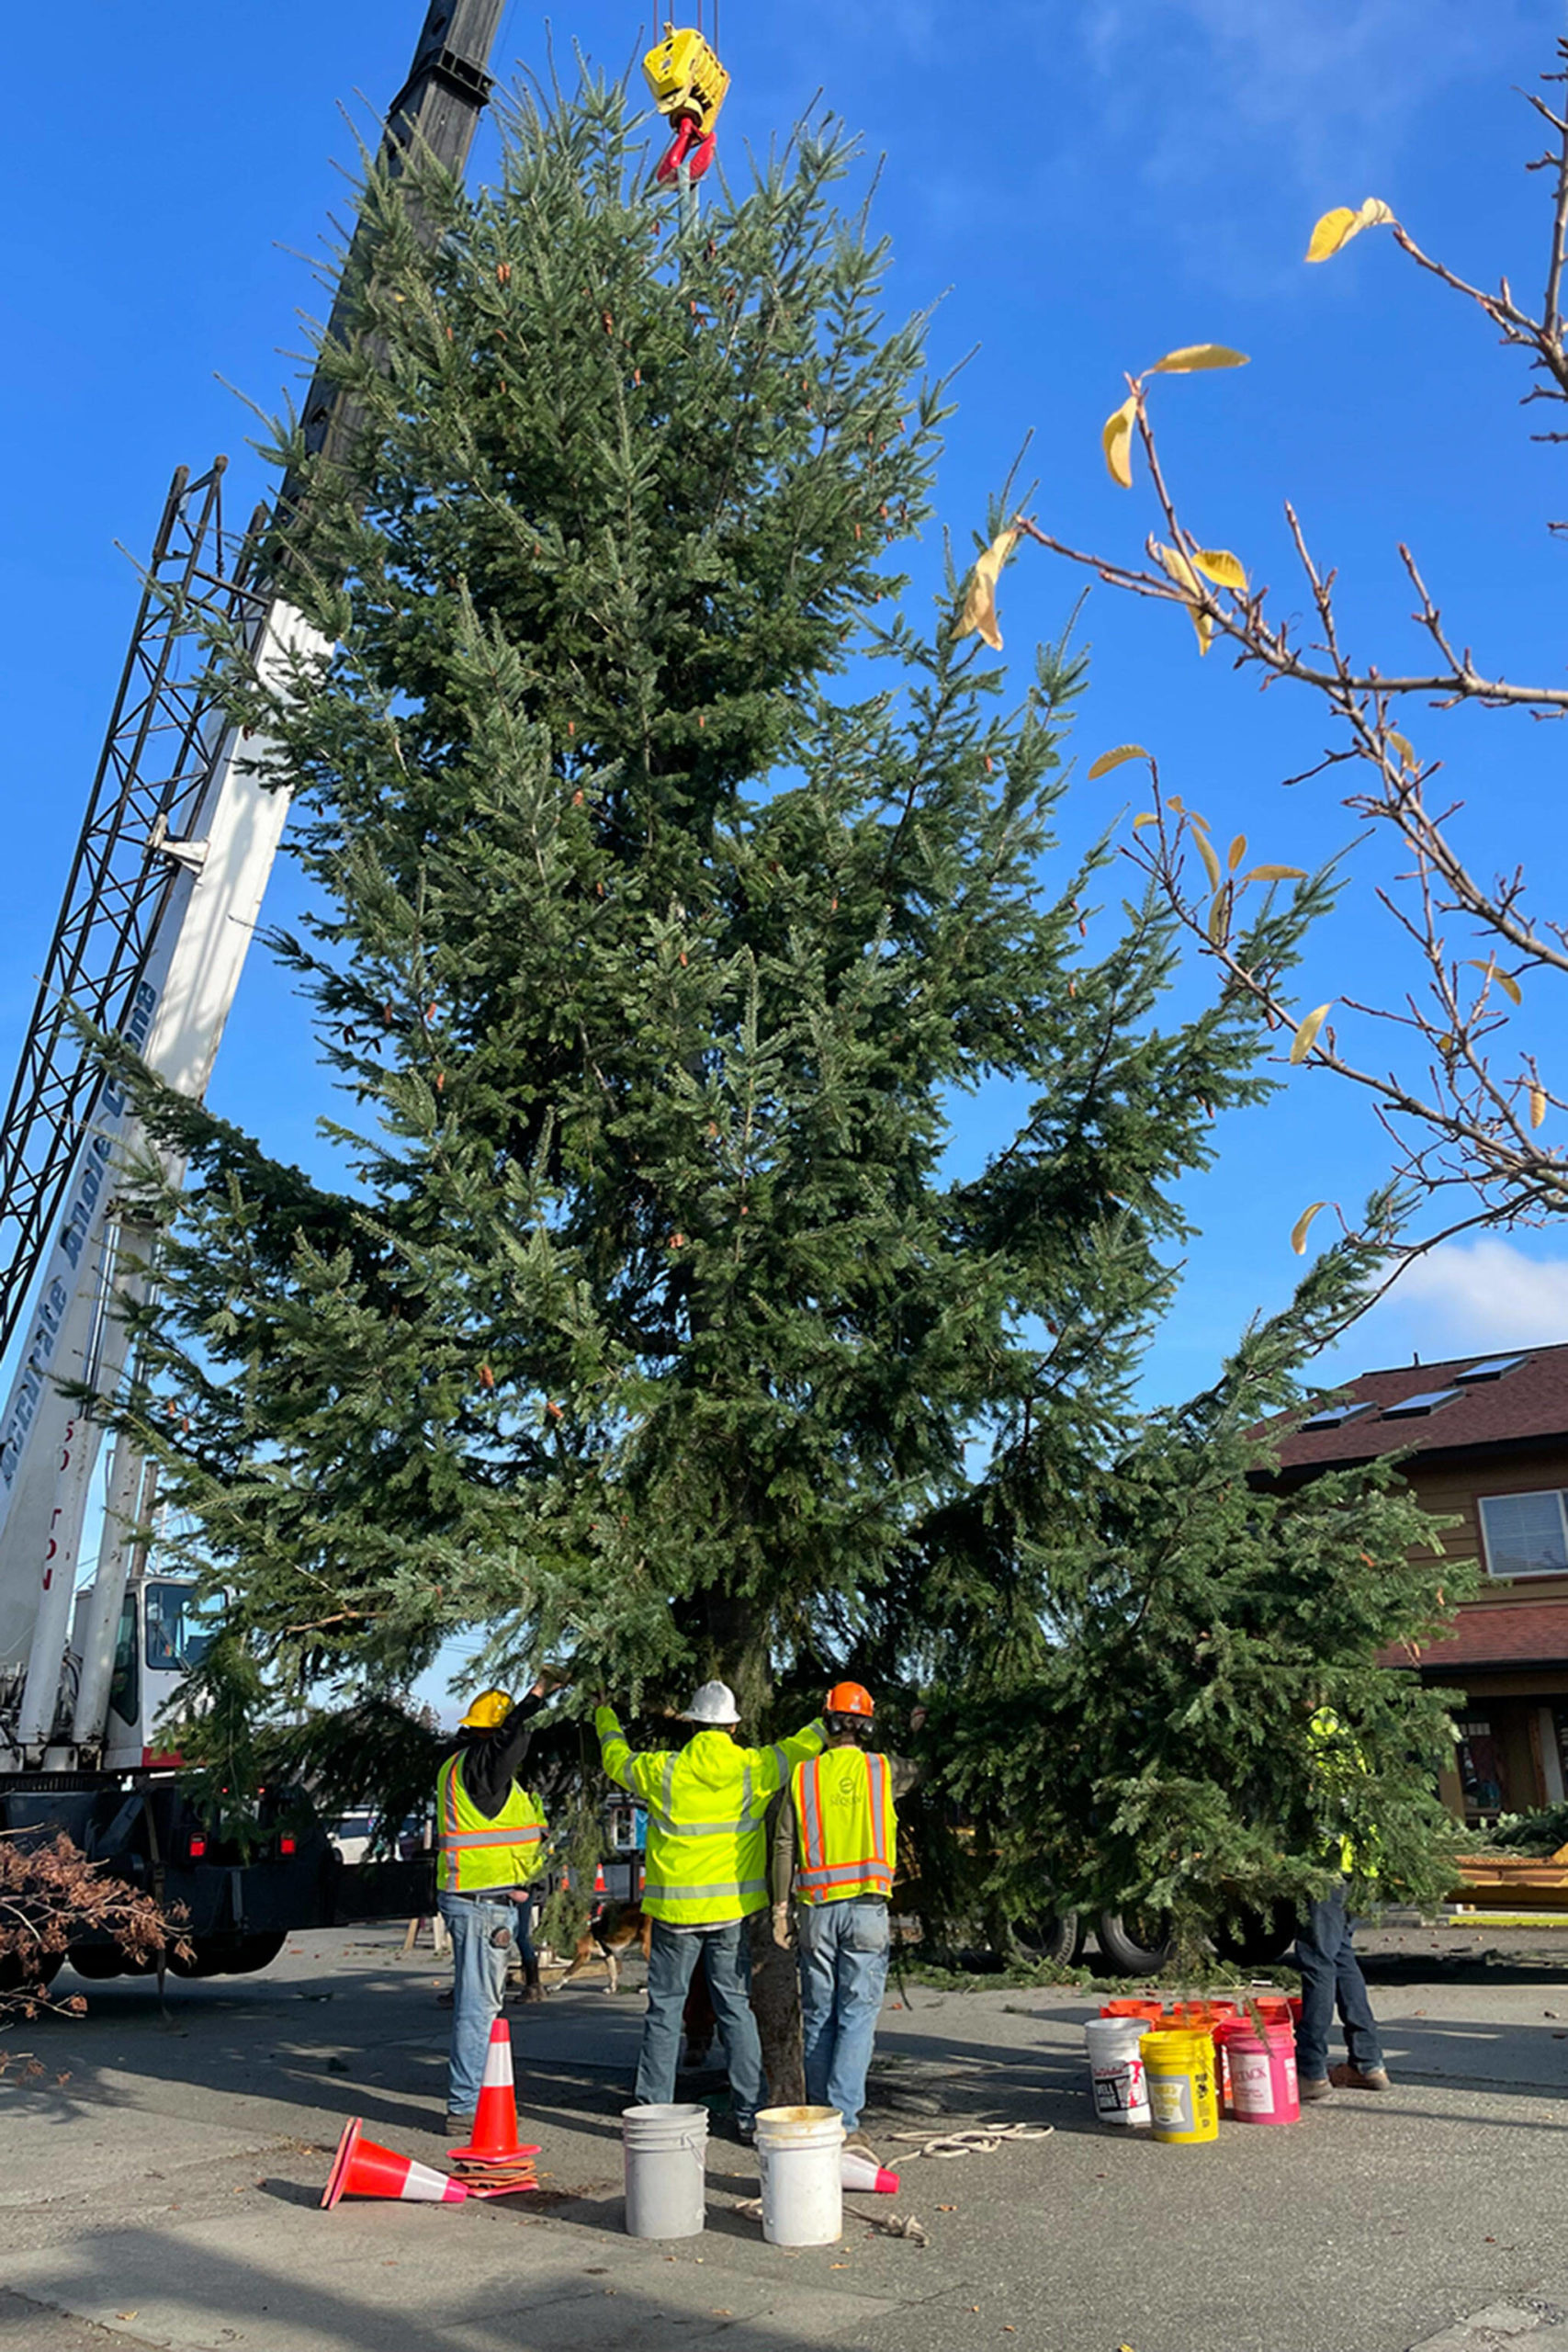 Sequim Gazette photo by Matthew Nash/ After having to raise funds to find a tree in 2021, volunteers Emily Westcott and Captain Crystal Stout said a local resident a few blocks from downtown Sequim wanted to donate his tree to continue the annual Christmas tree tradition.